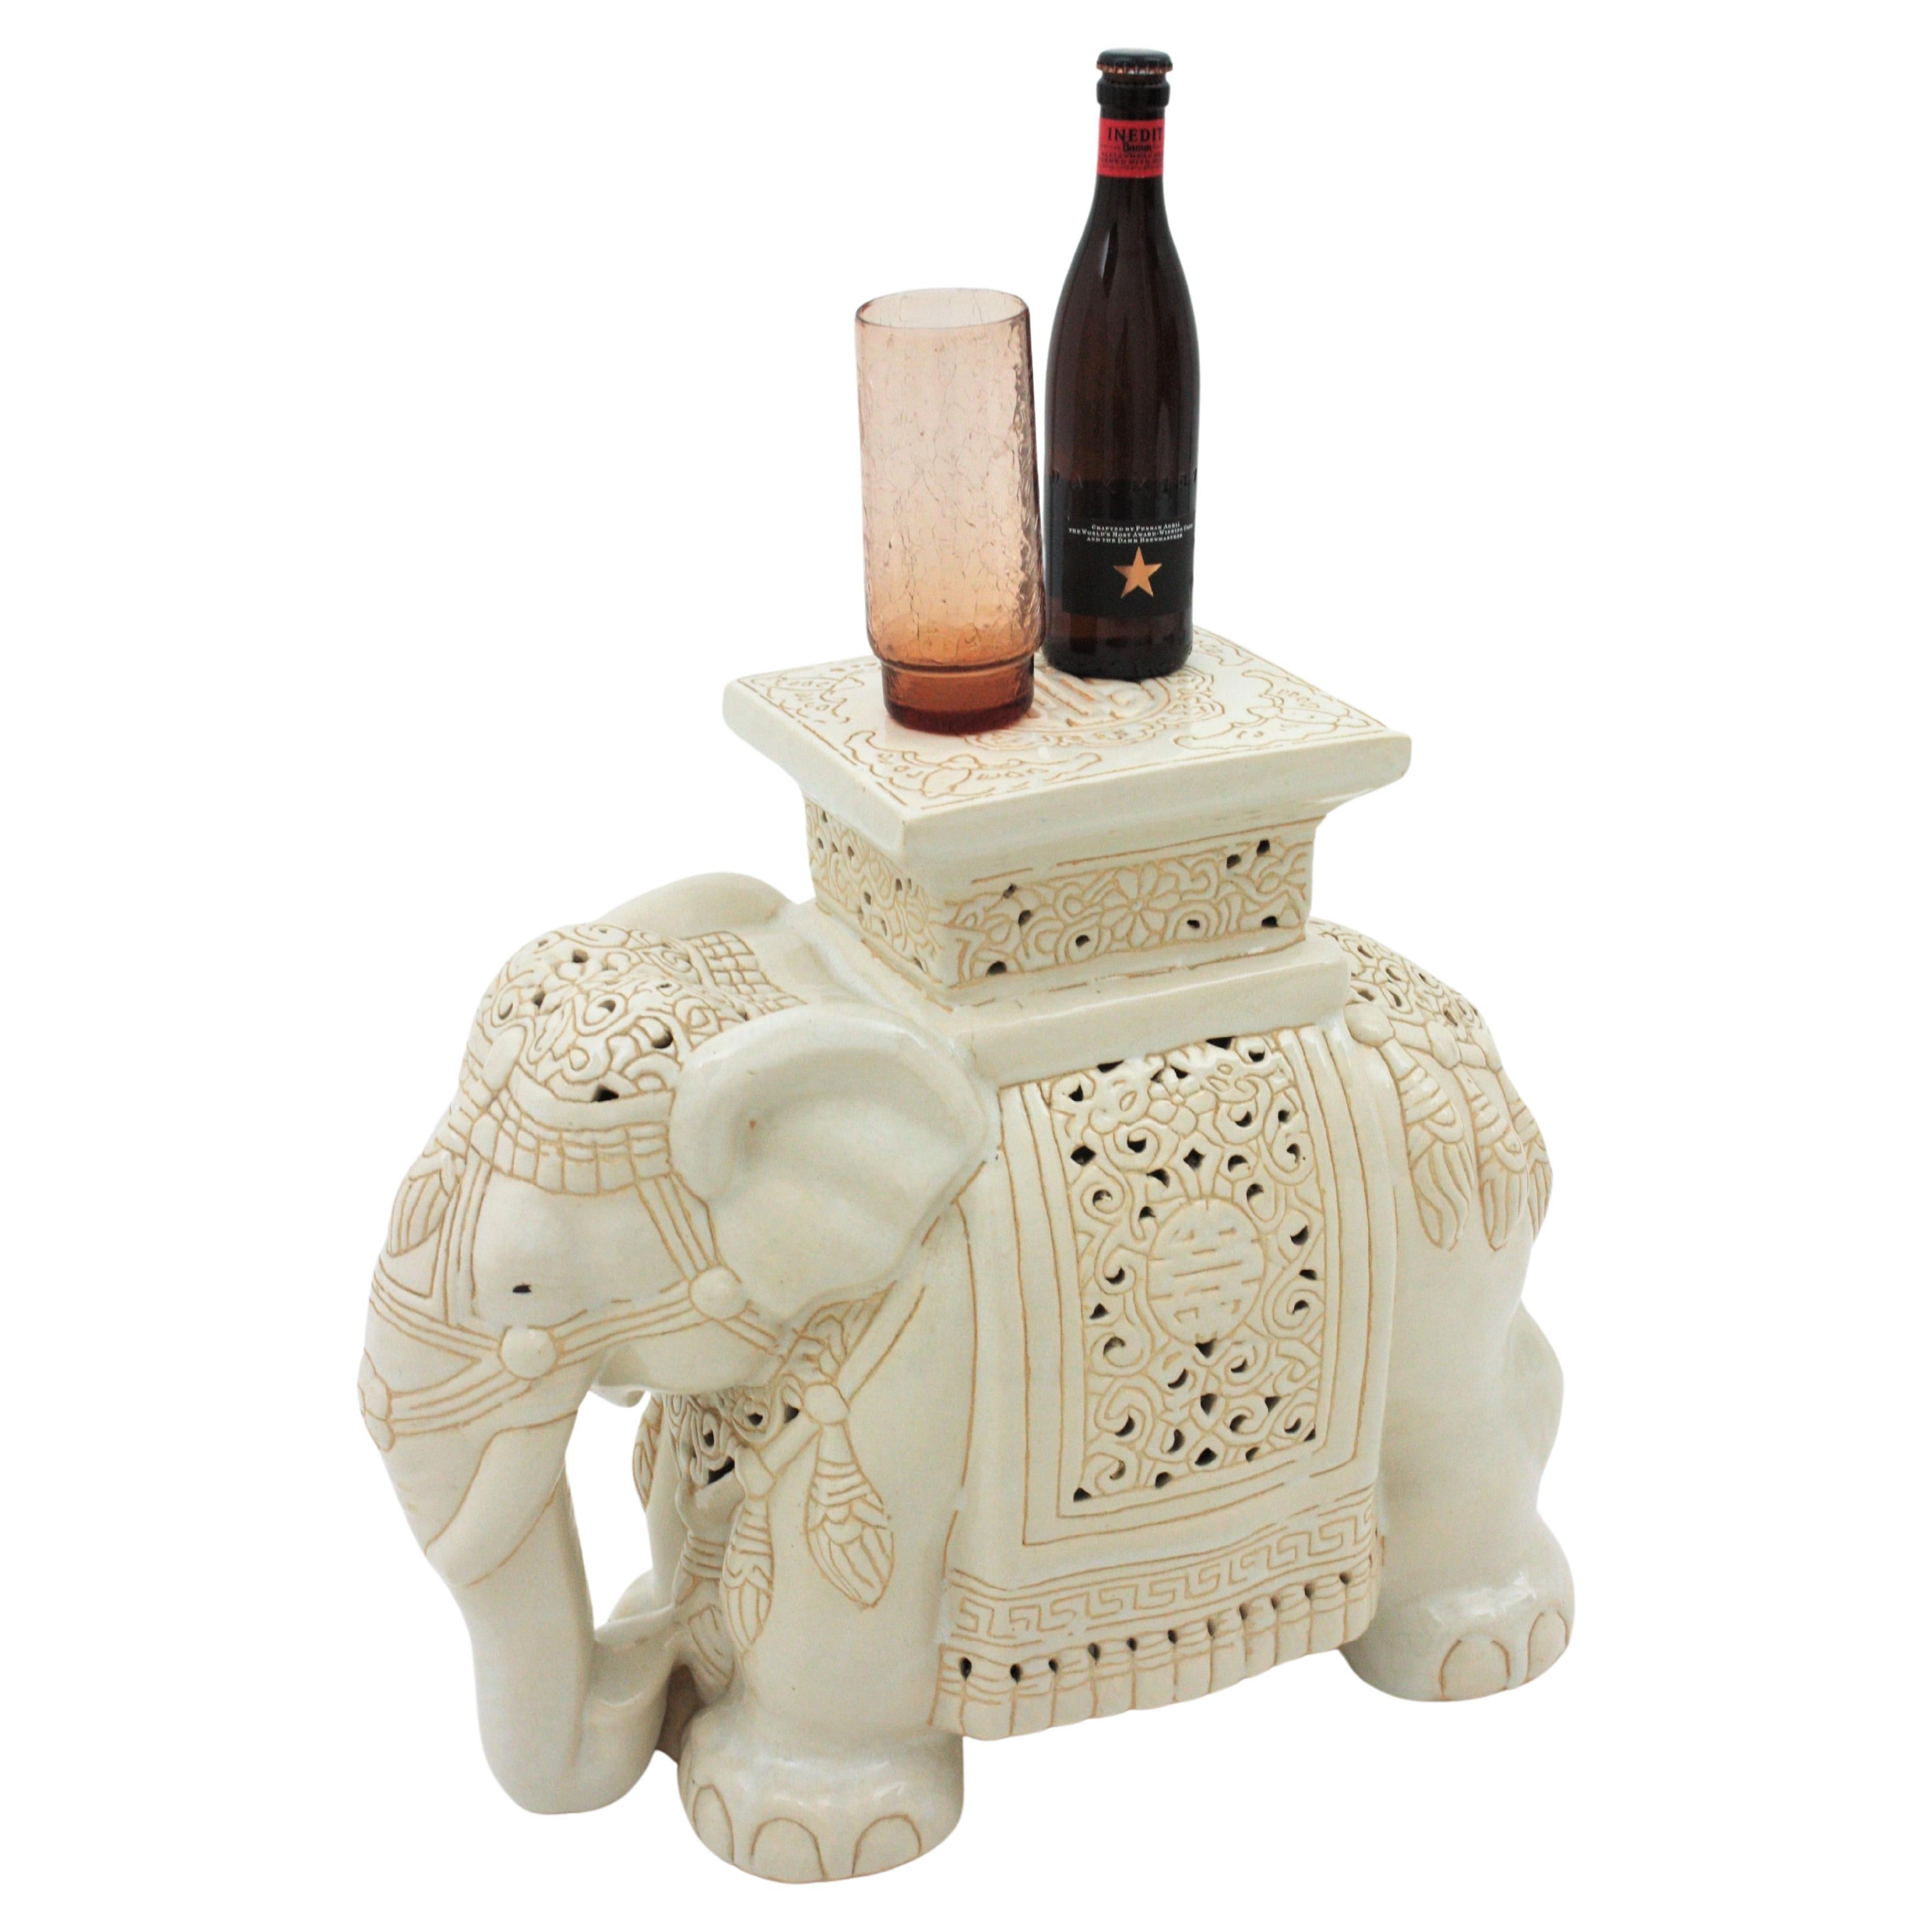 Eye-catching elephant table in off-white glazed ceramic.  Spain, 1960s
This elephant shaped end table stand was beautifully constructed. Its design combines Colonial Revival and Hollywood Regency accents.
It can be used as drinks table, end or side